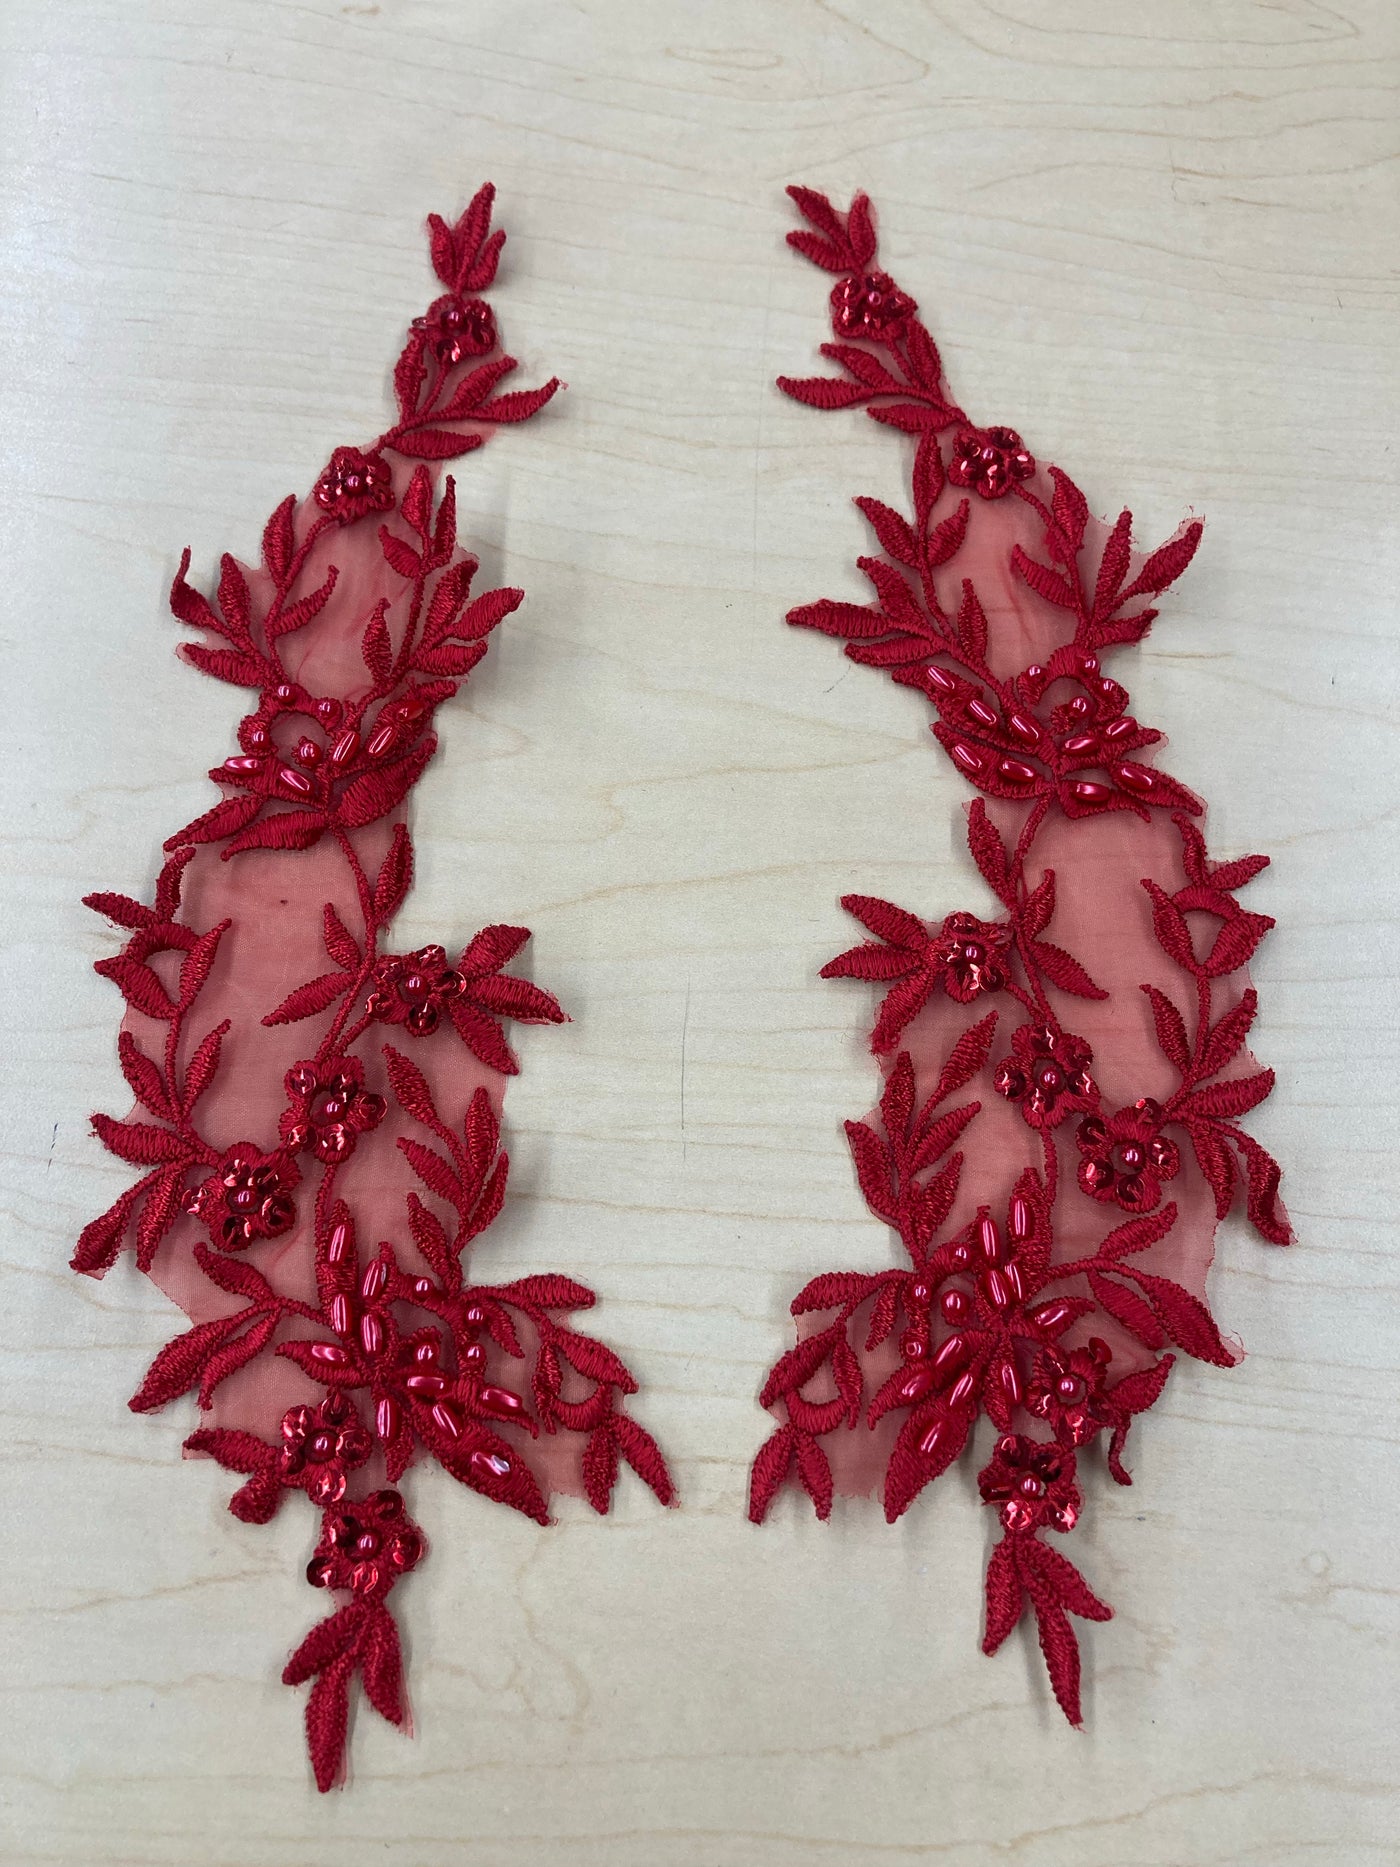 Red Beaded Floral Applique Lace on 100% Polyester Organza Sold by the Pair. This can be allied to theatrical, dance, ballroom, costumes, bridal dresses, bridal headbands endless possibilities.  Lace Usa